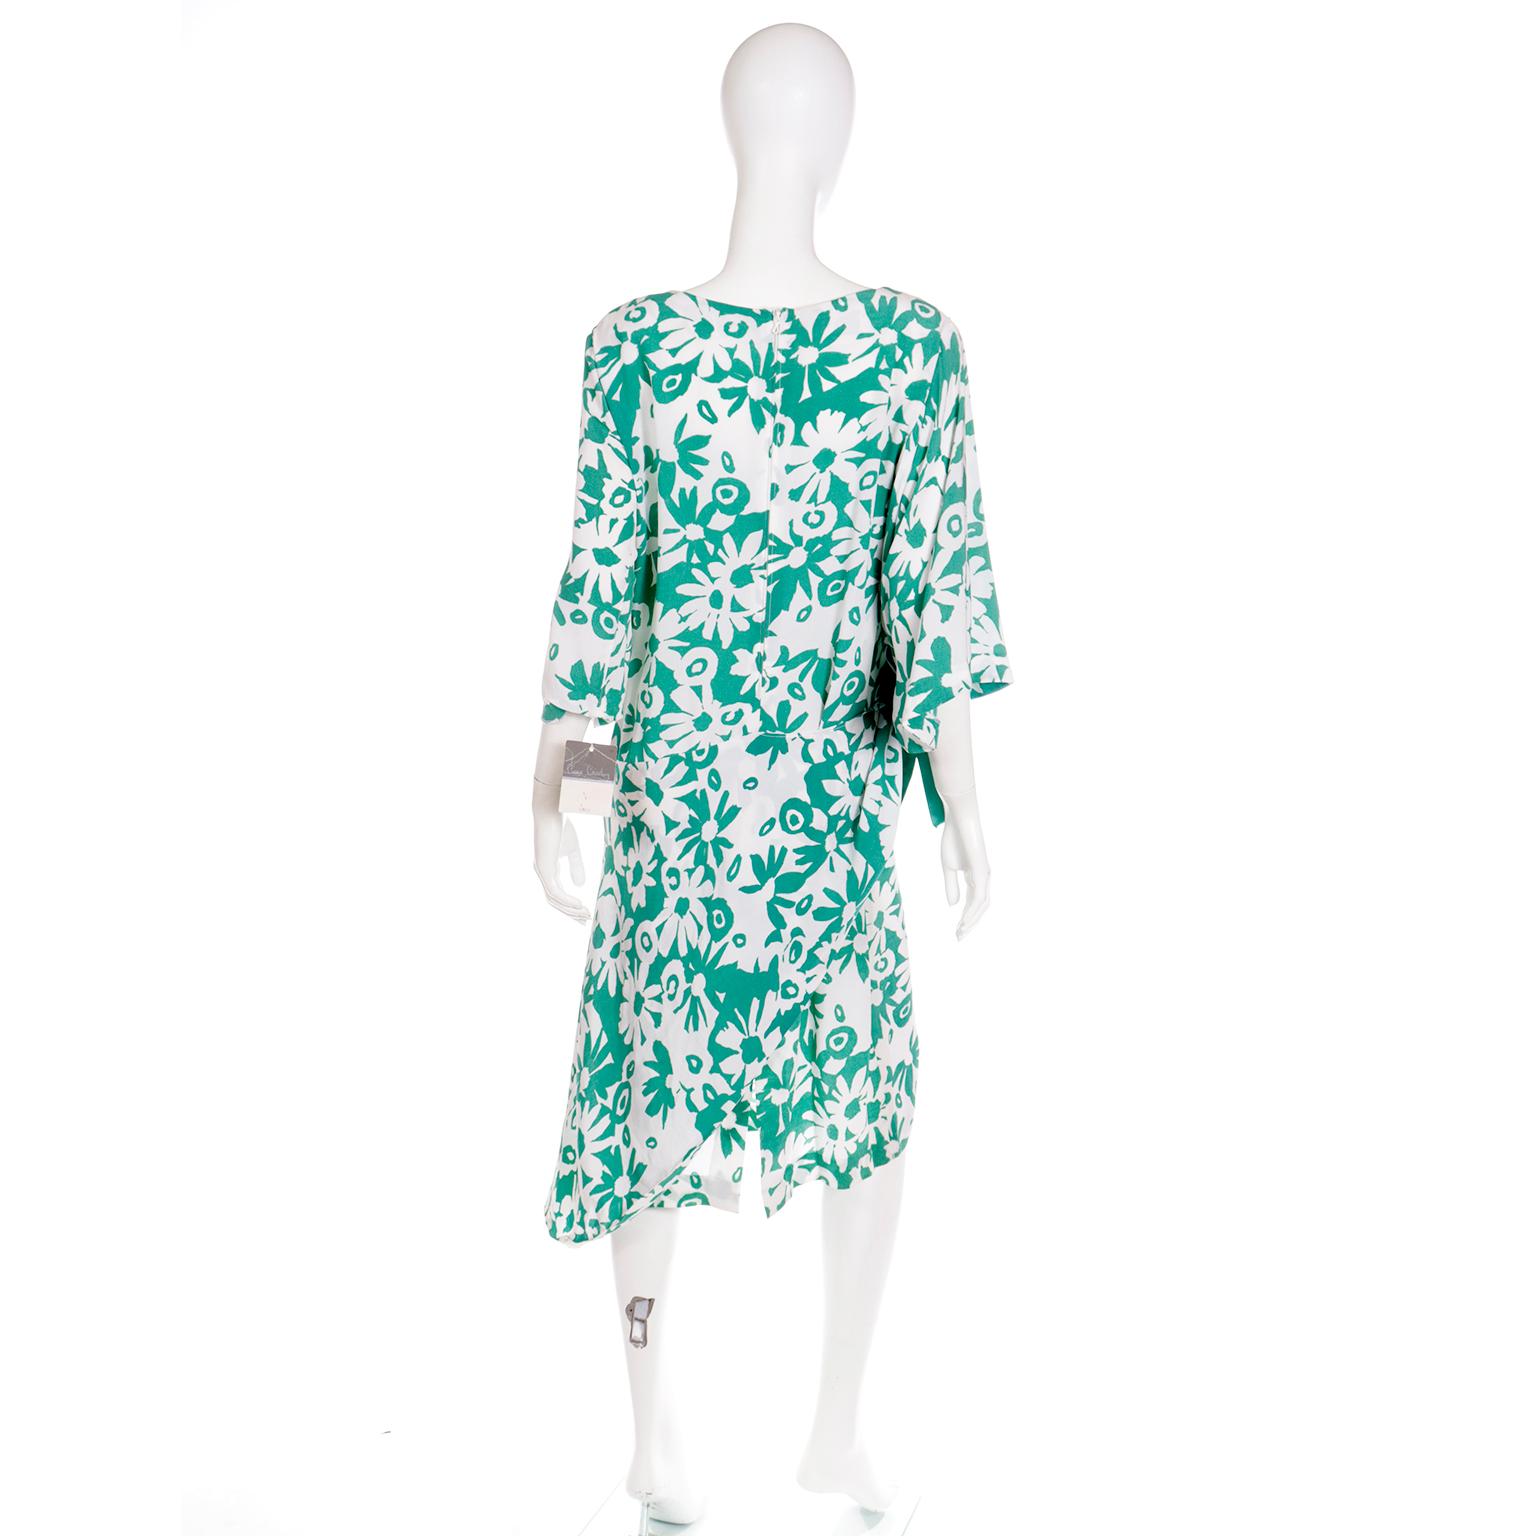 1980s Pierre Cardin Green and White Floral Asymmetrical Dress with Side Tie In Excellent Condition For Sale In Portland, OR